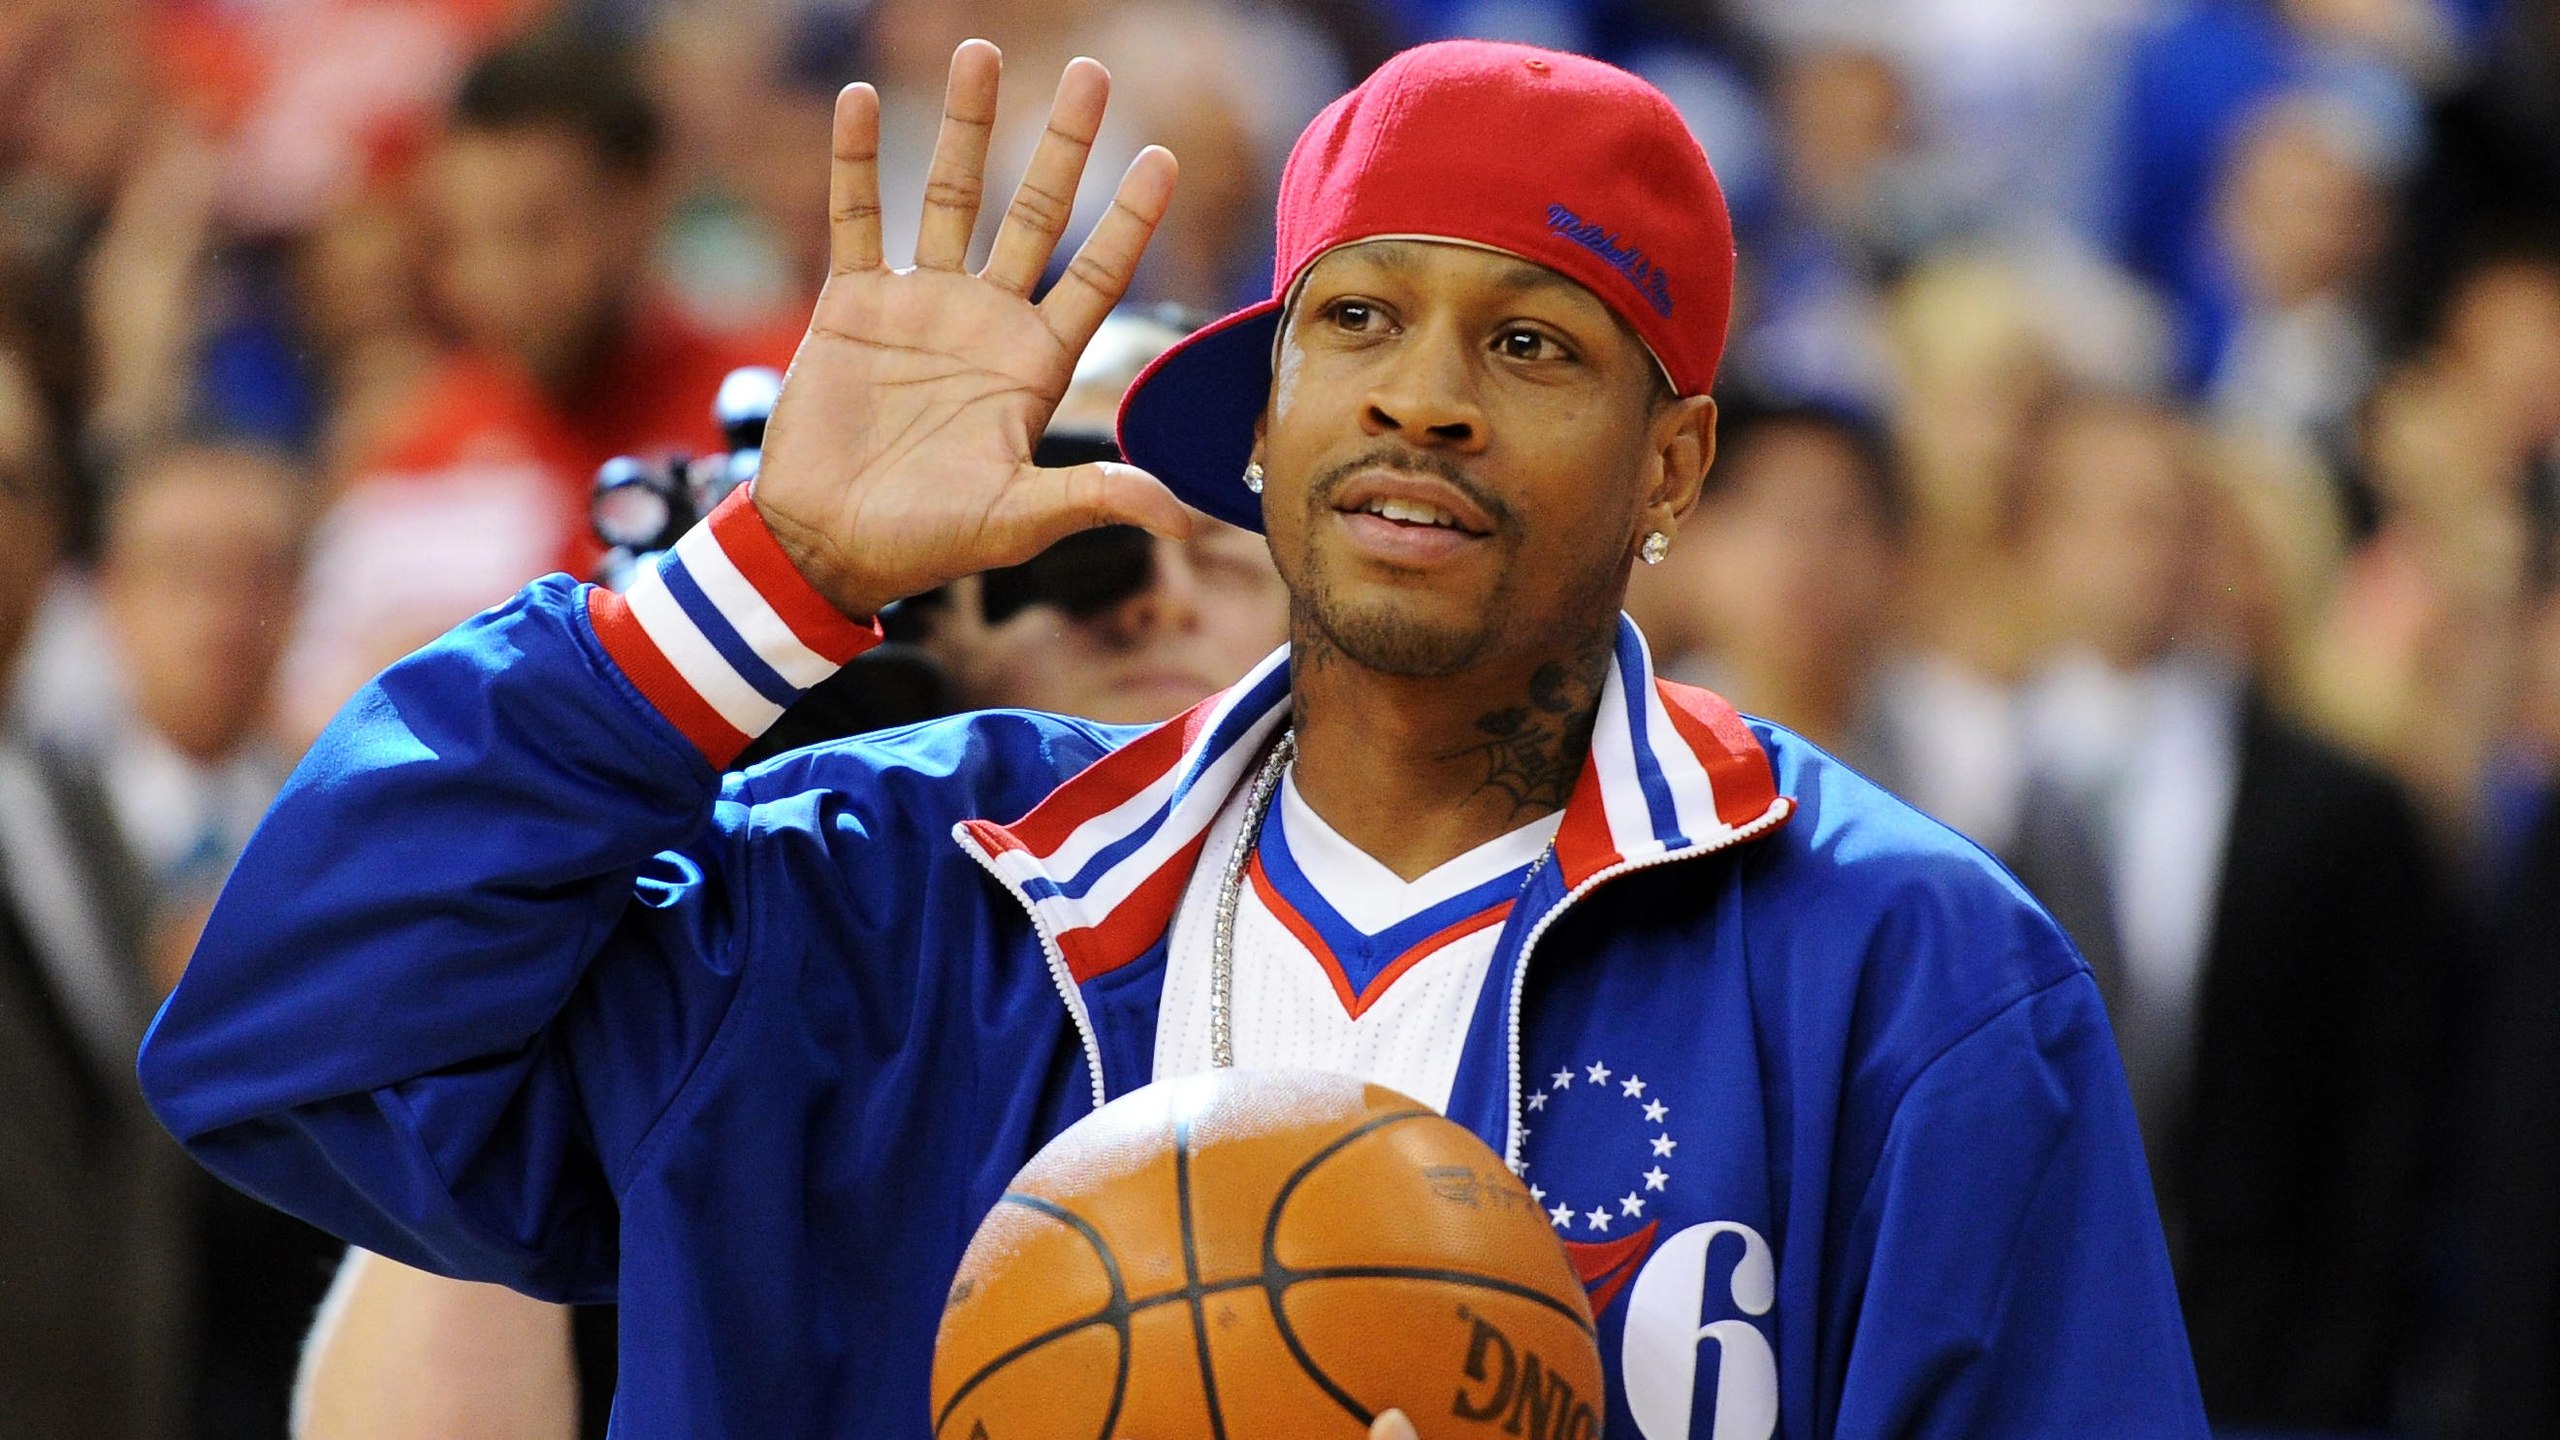 Allen Iverson Basketball Nba Wallpaper Hd Sports 4k Wallpapers Images Photos And Background Wallpapers Den